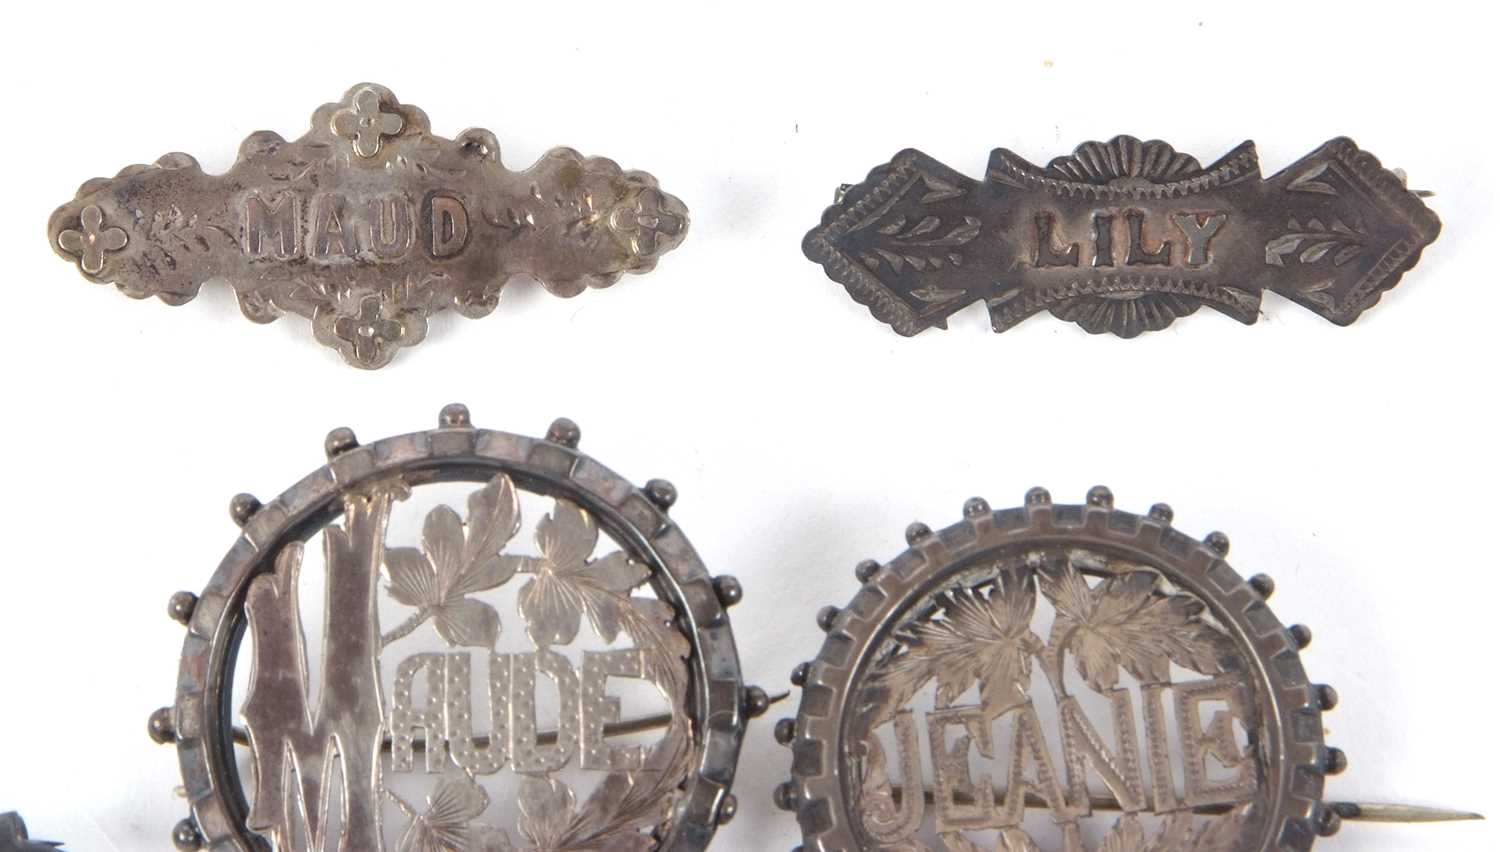 Eight early 20th century silver and white metal name brooches, to include Jeanie, Maude, Louie, - Image 3 of 6